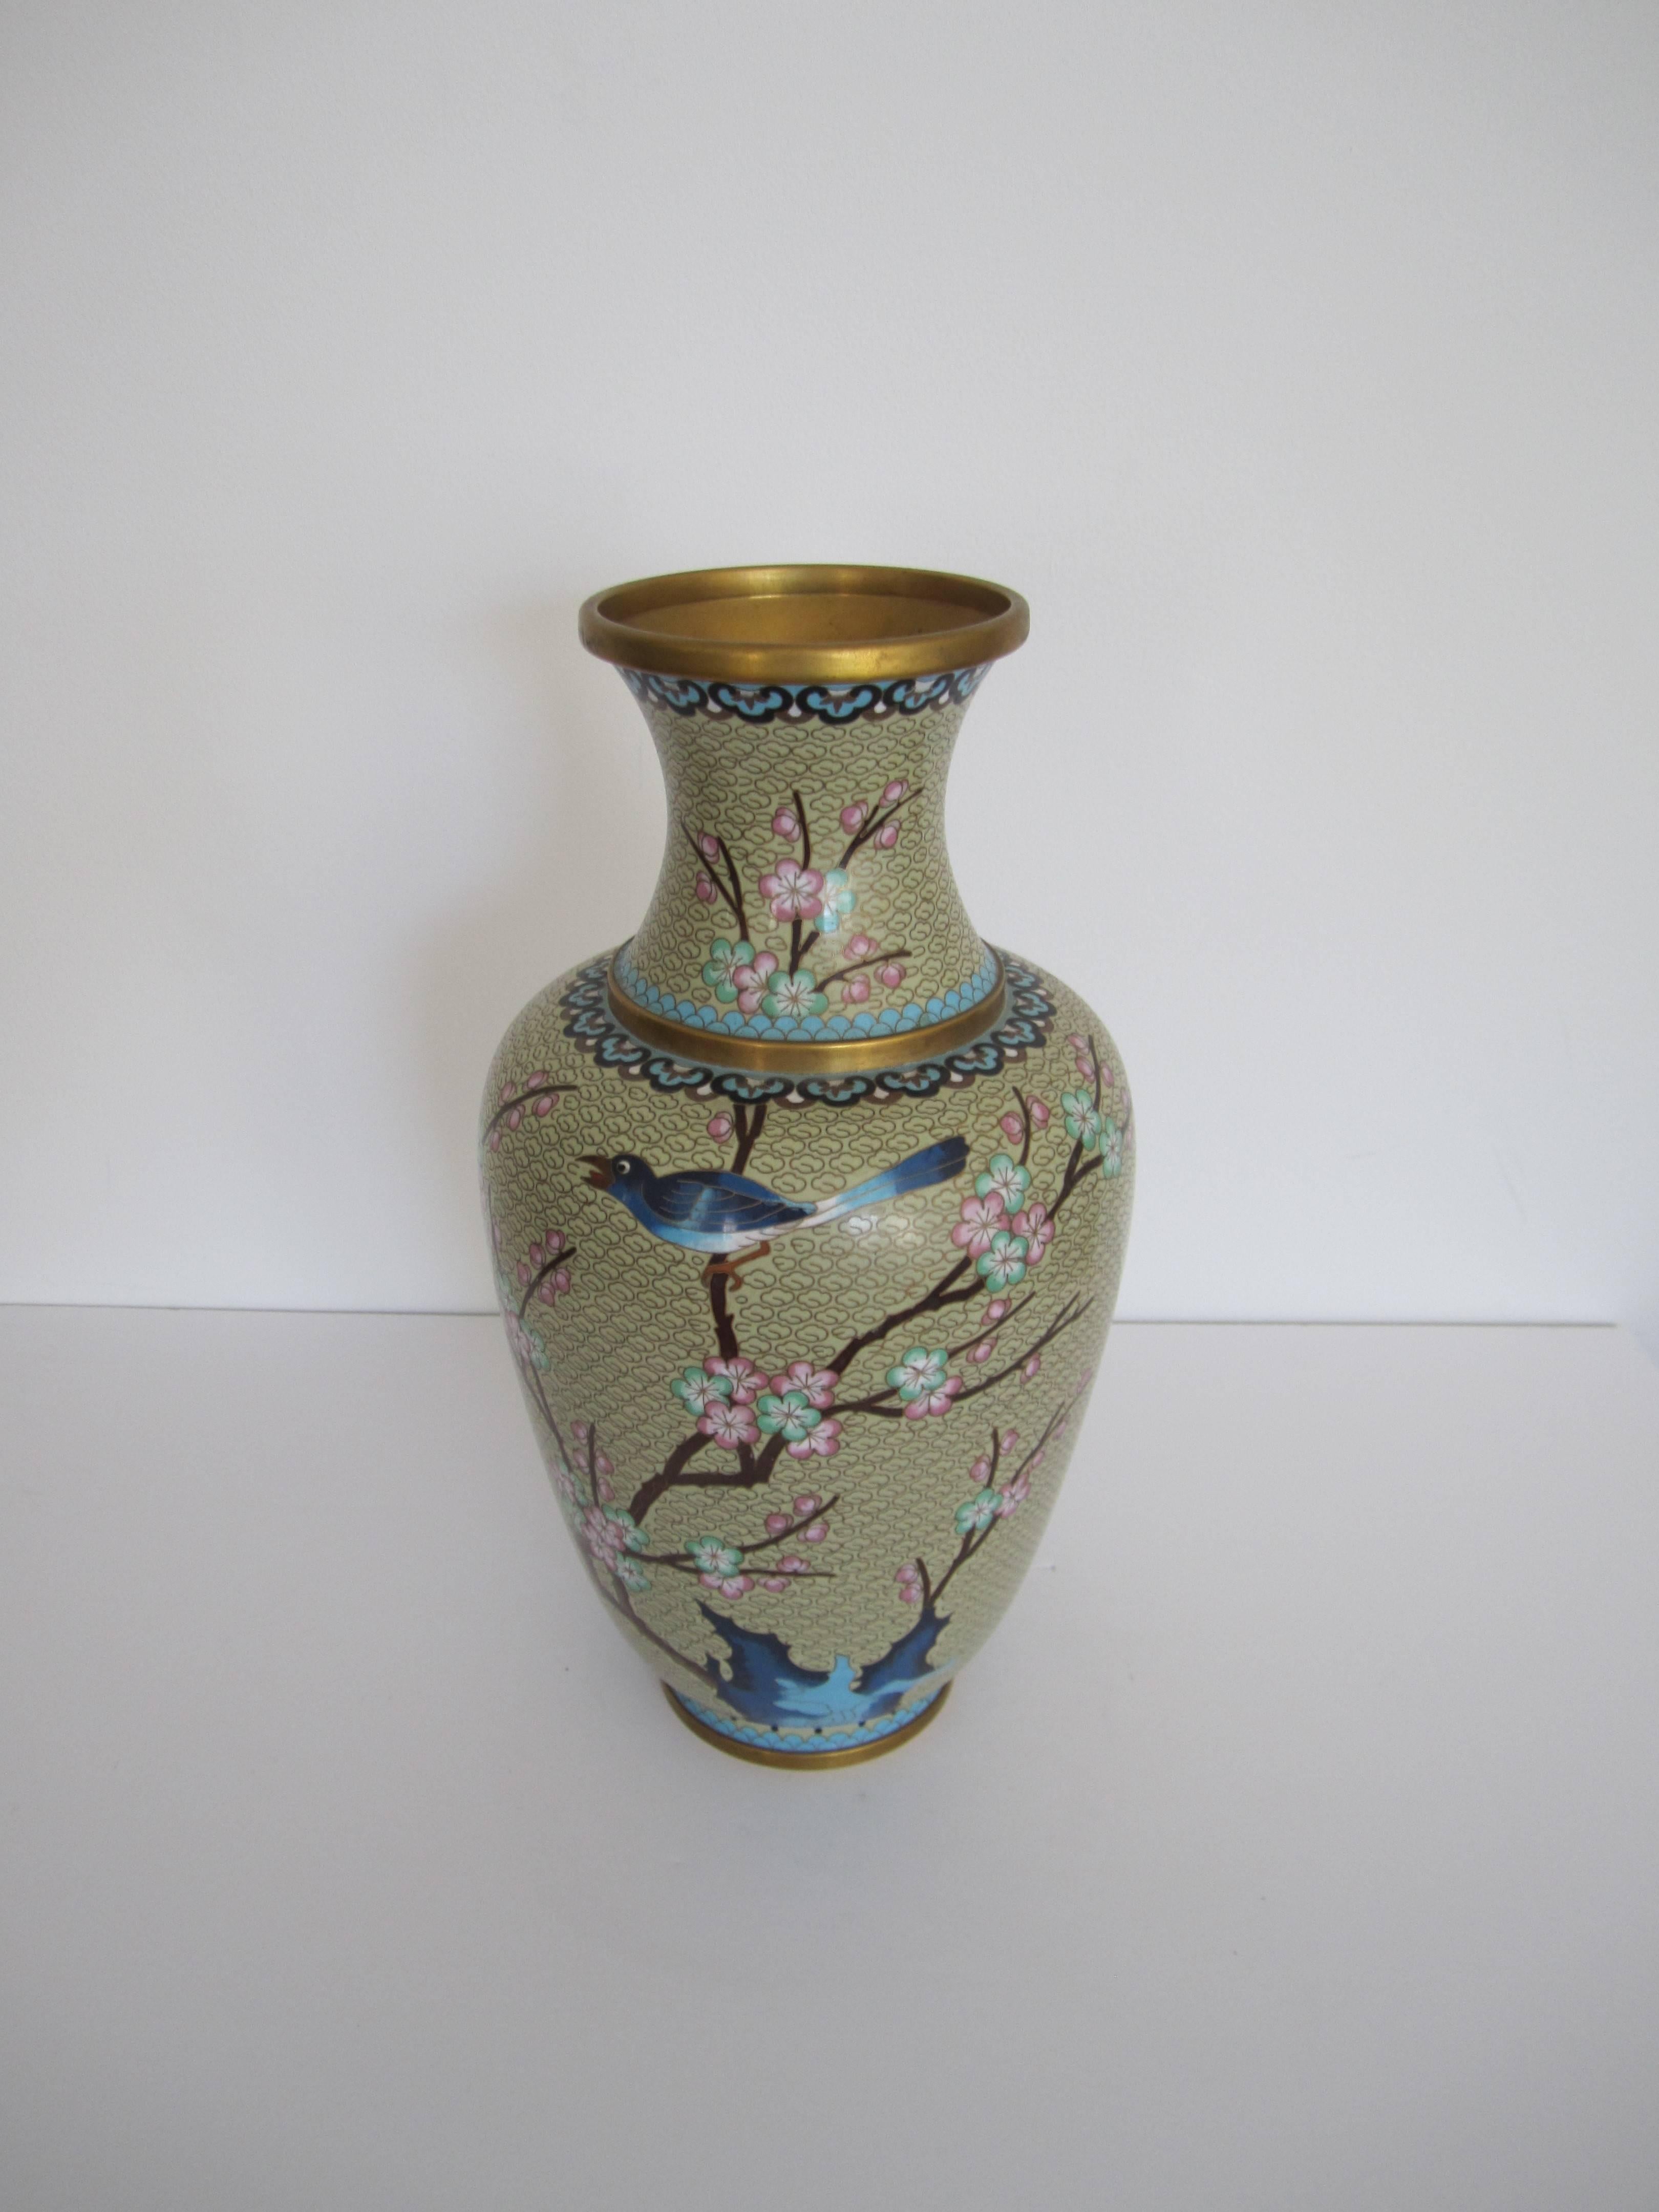 Chinese Beautiful Large Vintage Asian Cloisonné Vase with Bird, circa 1970s